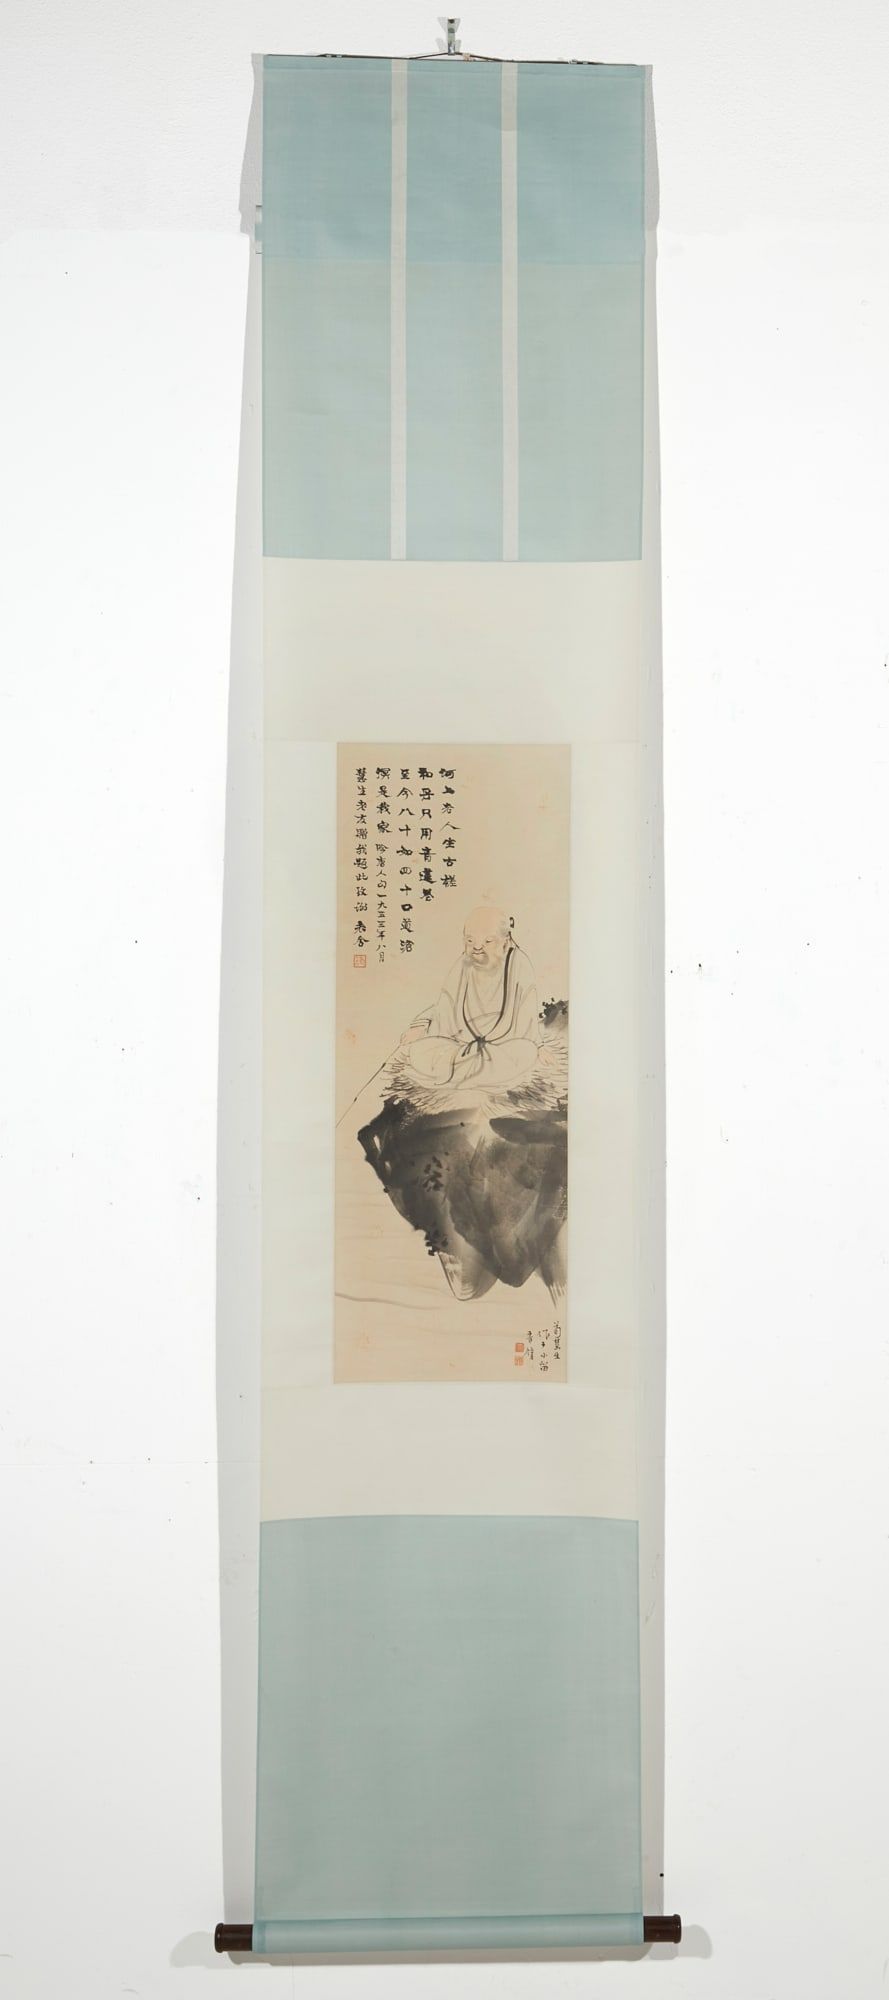 A CHINESE FIGURE PAINTING HANGING 2fb3d84